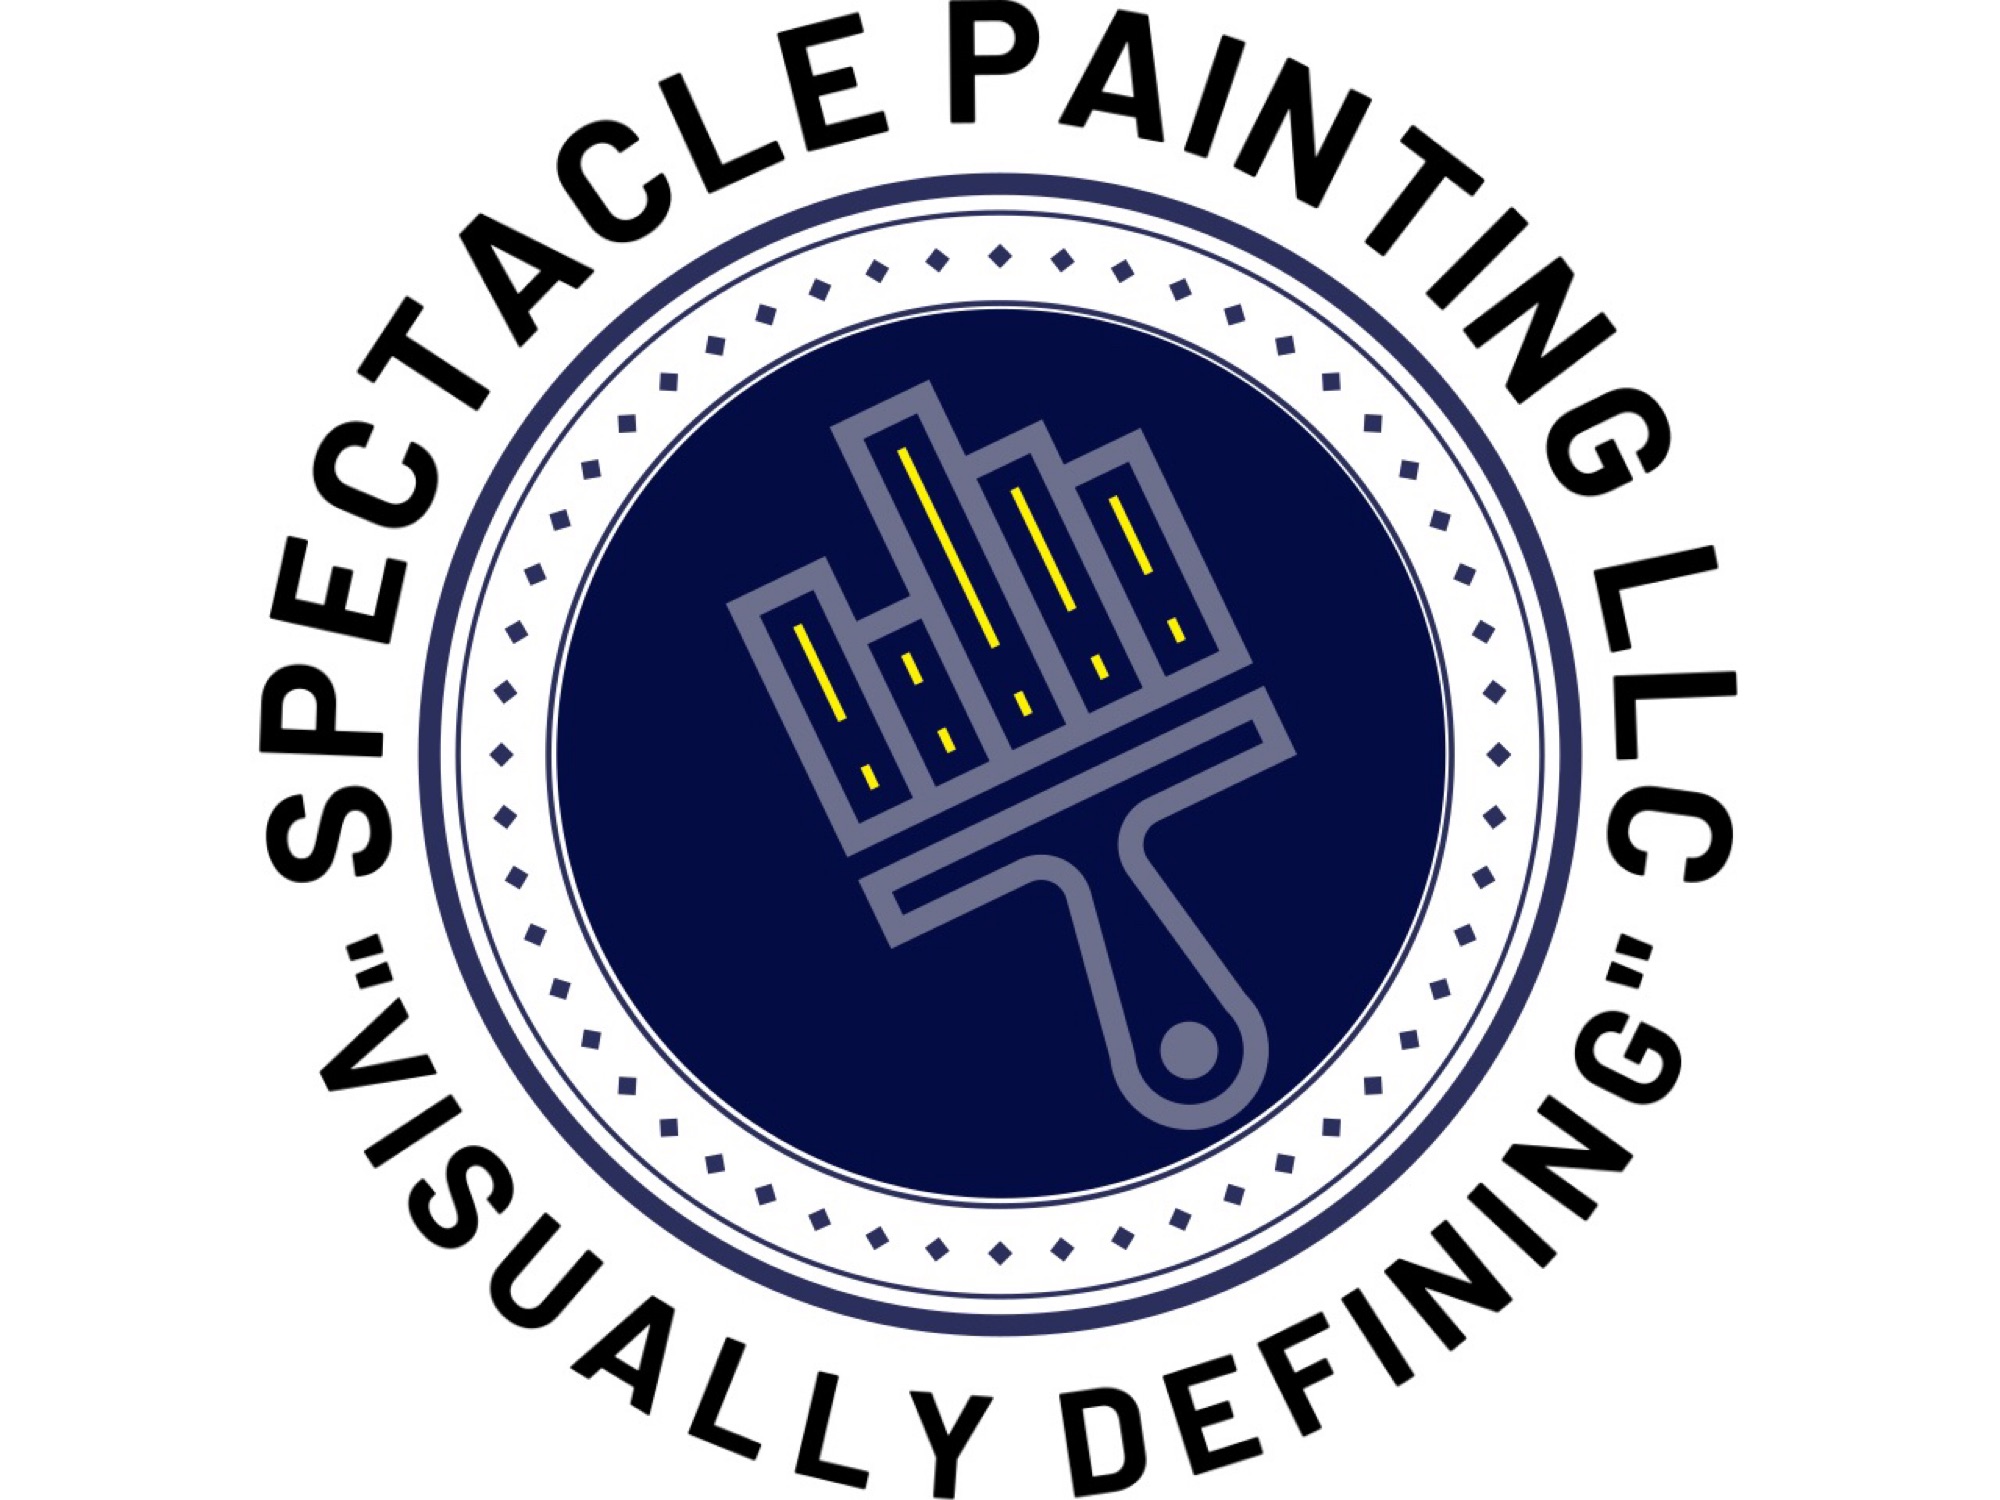 Spectacle Painting, LLC Logo